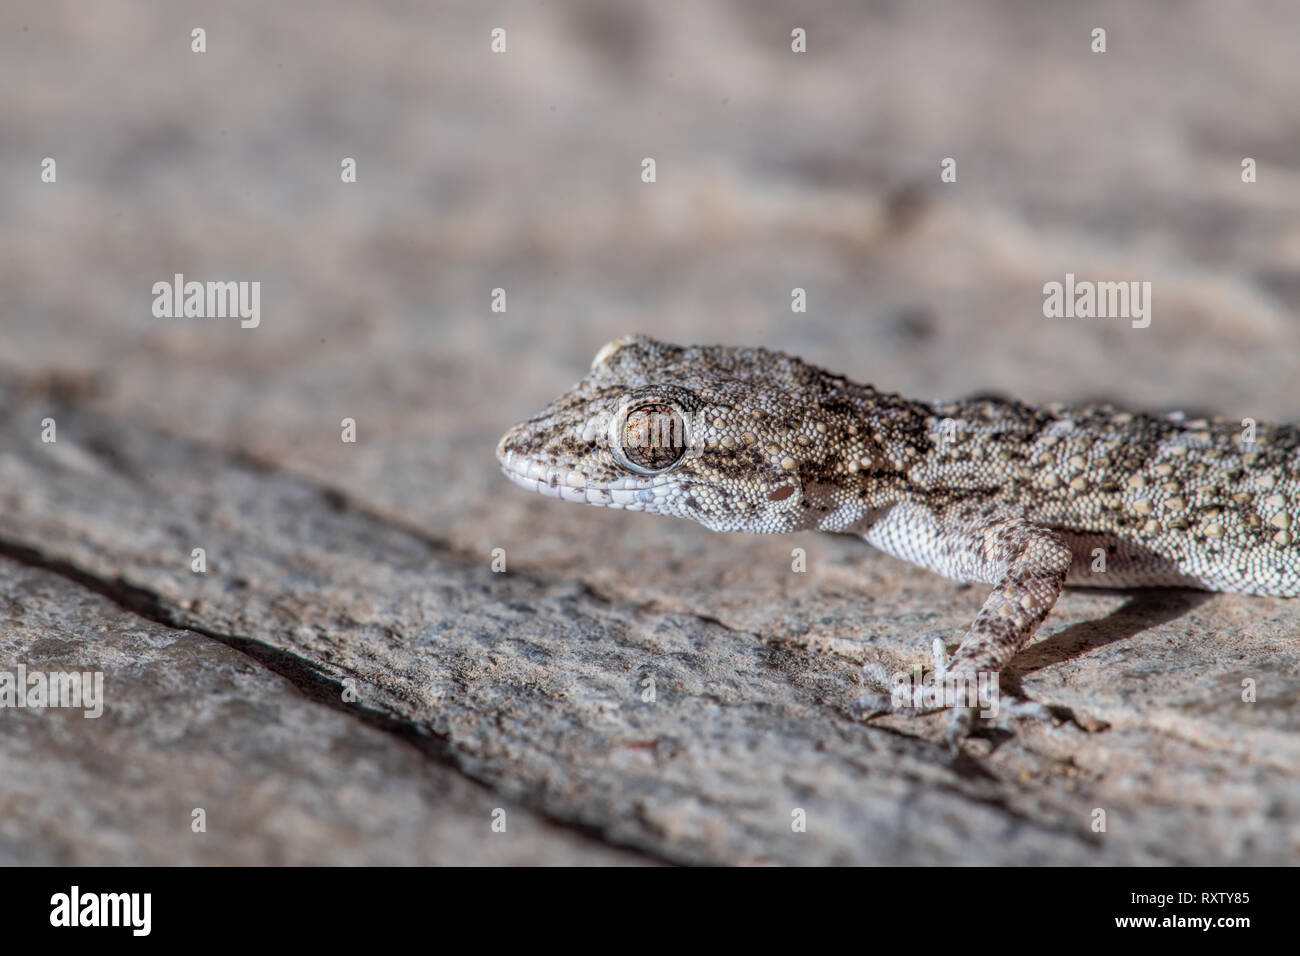 A Kotschy's gecko found in its natural environment Stock Photo